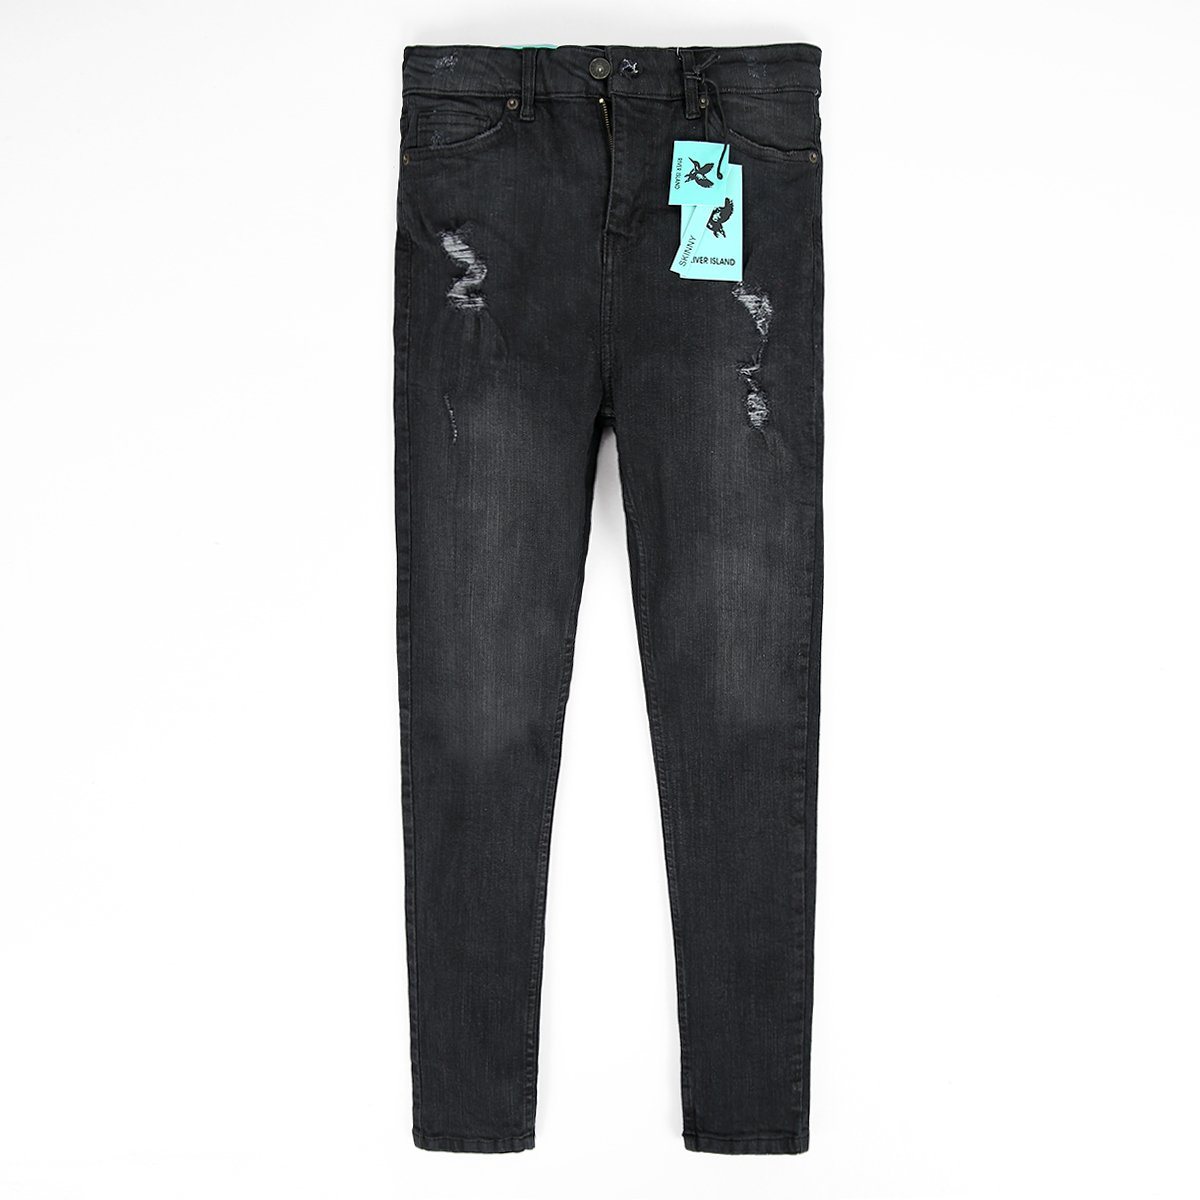 Greyish Black Ripped Skinny Fit Jeans For Women (1694)